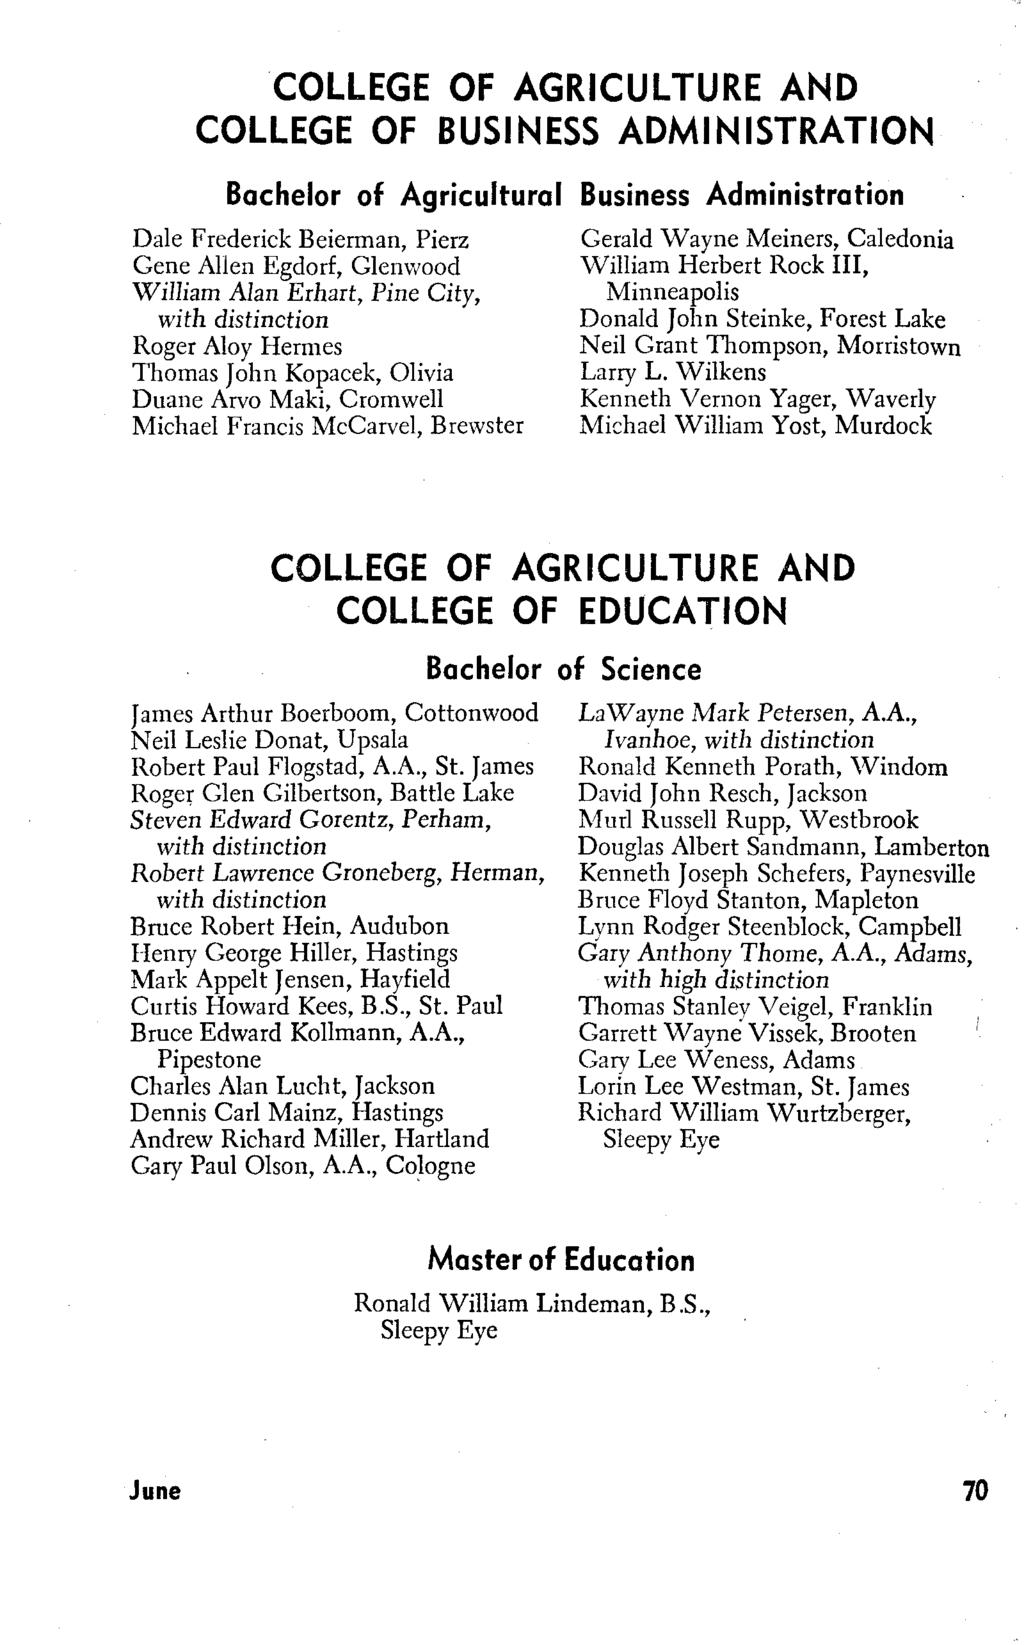 COLLEGE OF AGRICULTURE AND COLLEGE OF BUSINESS ADMINISTRATION Bachelor of Agricultural Business Administration Dale Frederick Beierman, Pierz Gene Allen Egdorf, Glenwood Wil1iam Alan Erhart, Pine